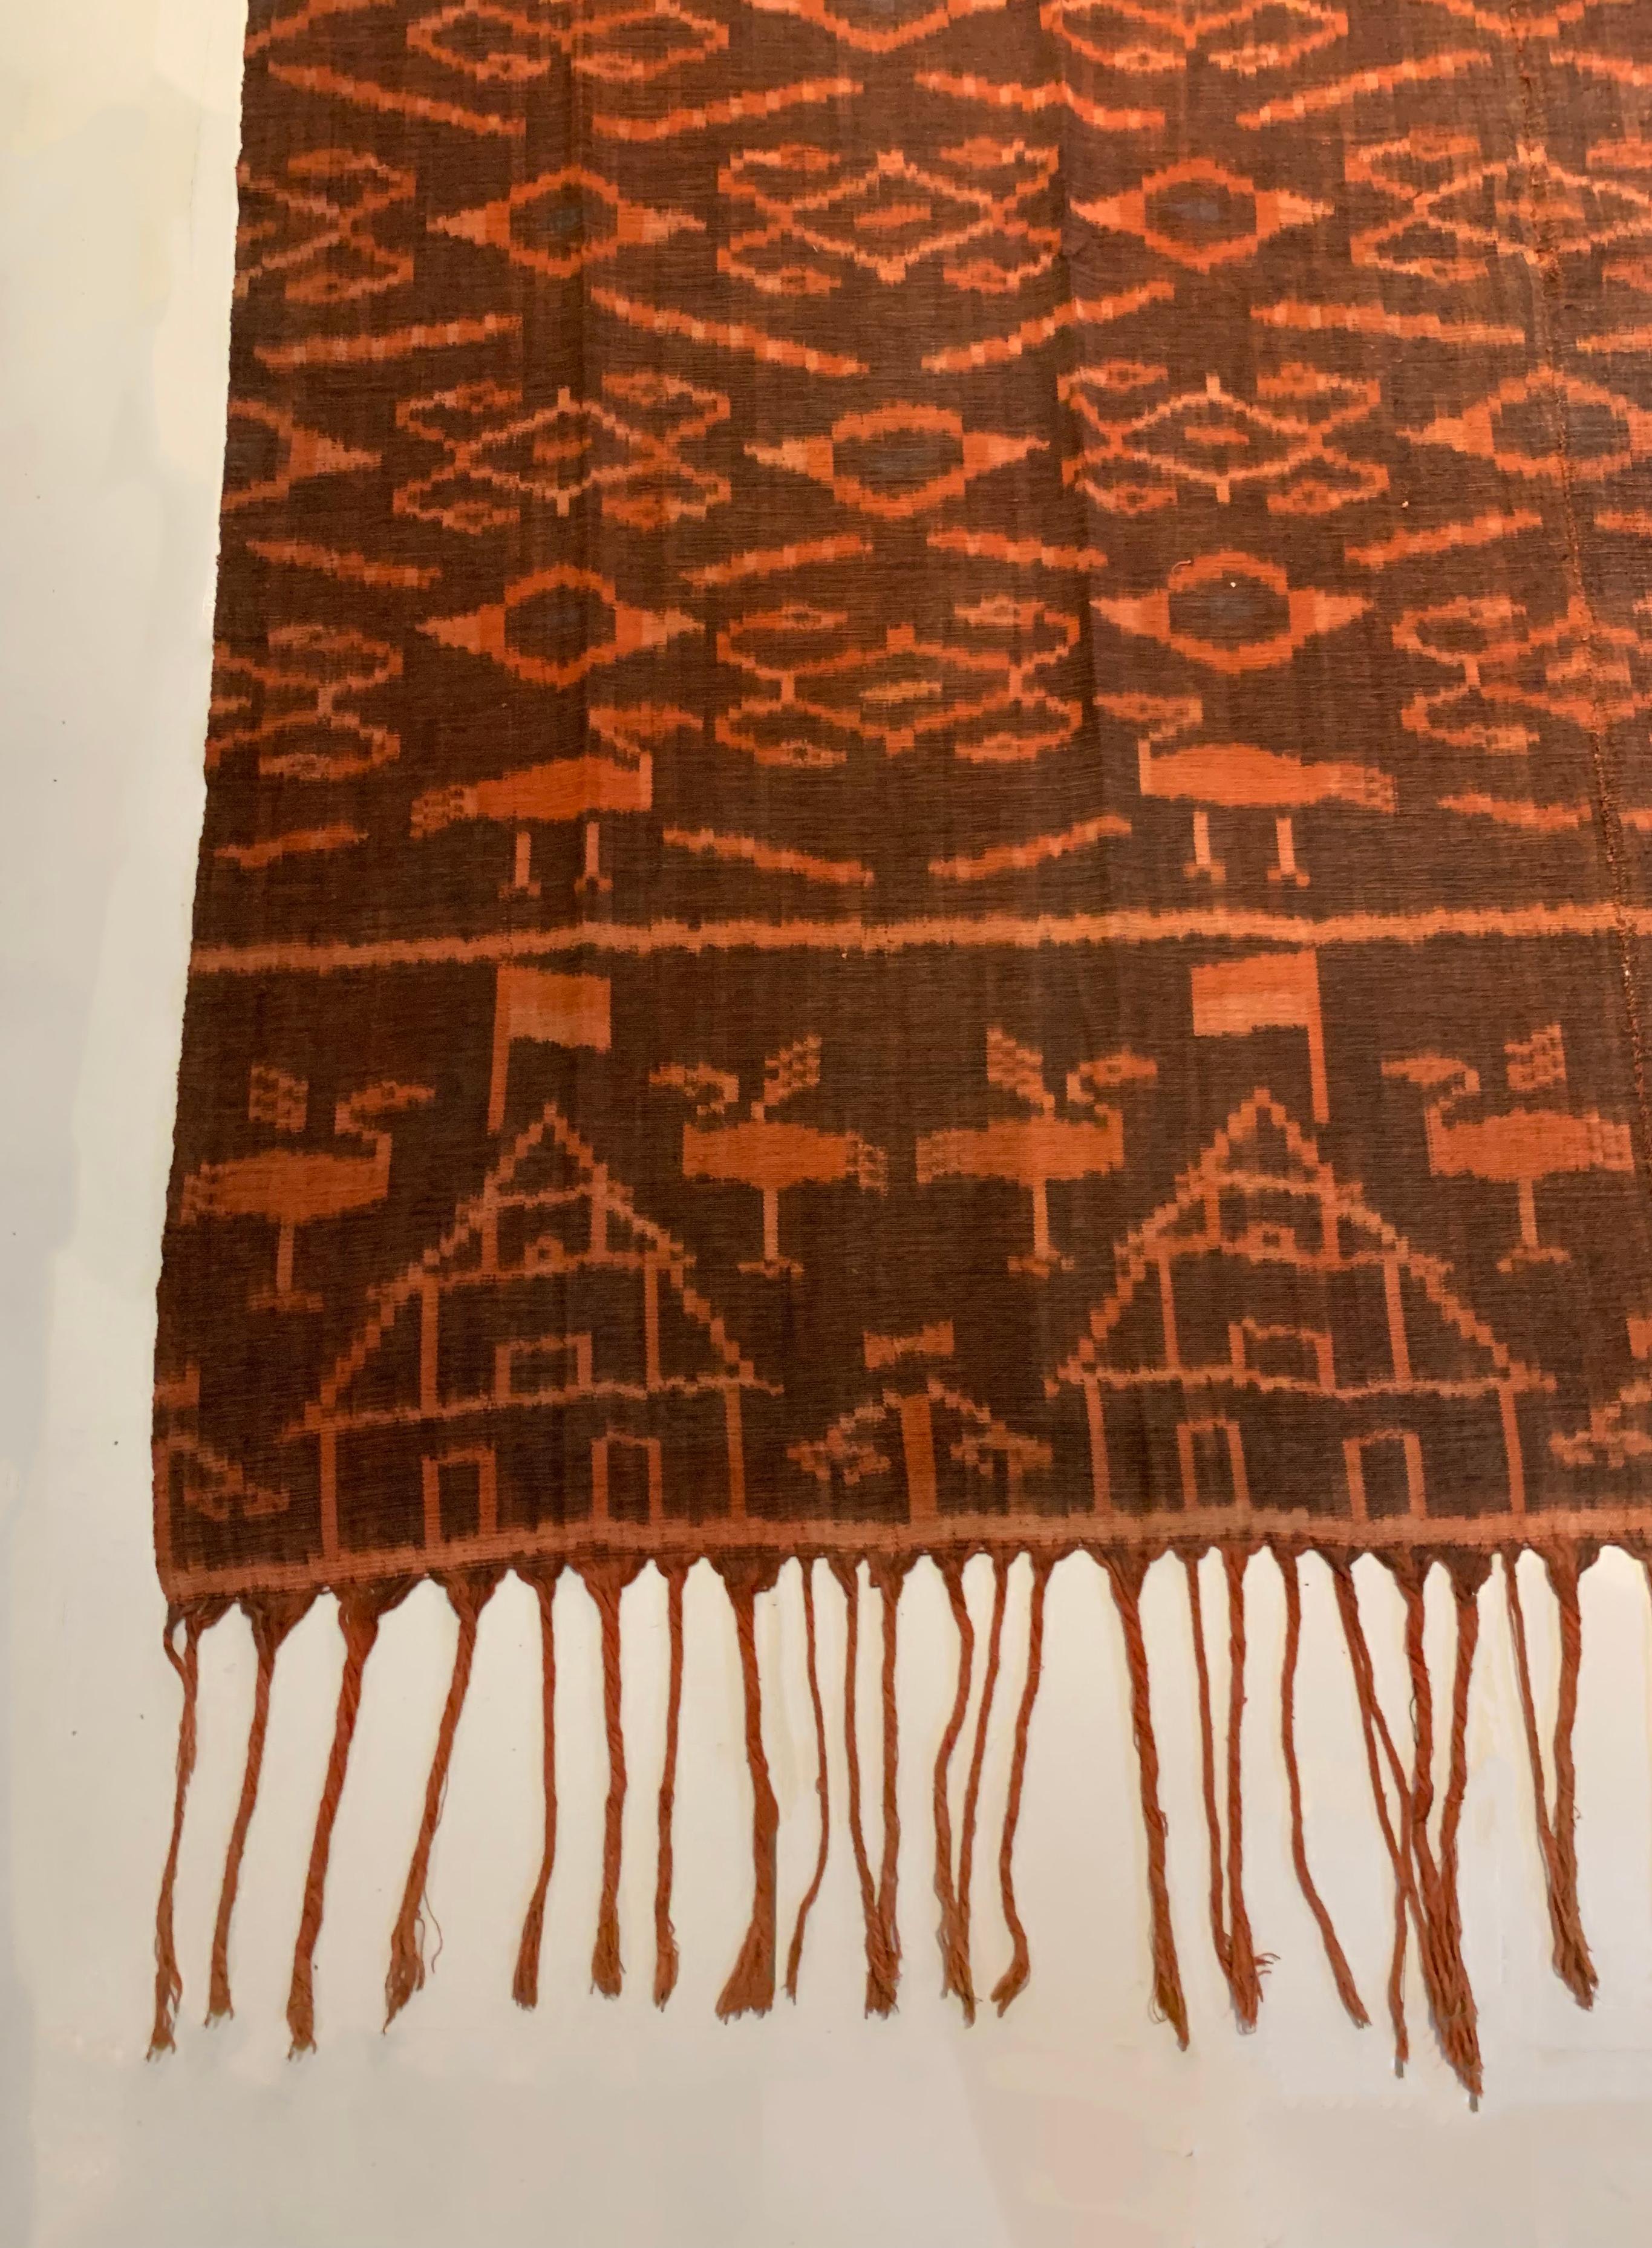 This Ikat textile originates from the Island of Flores, Indonesia. It is hand-woven using naturally dyed yarns via a method passed on through generations. It features a mix of tribal patterns as well as the Indonesian flag. There are also bird